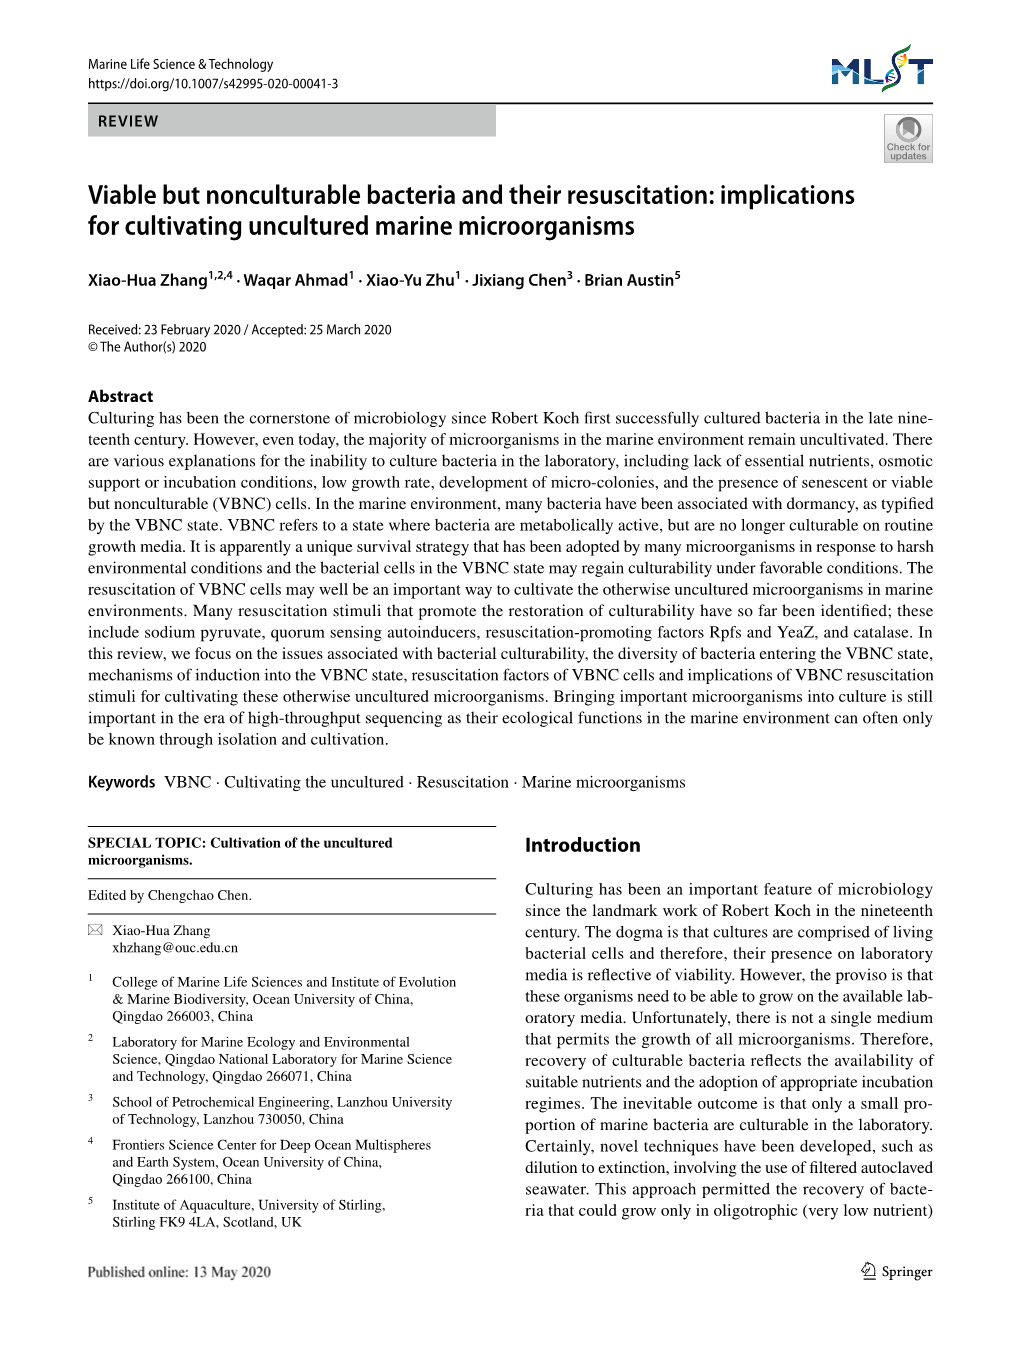 Viable but Nonculturable Bacteria and Their Resuscitation: Implications for Cultivating Uncultured Marine Microorganisms